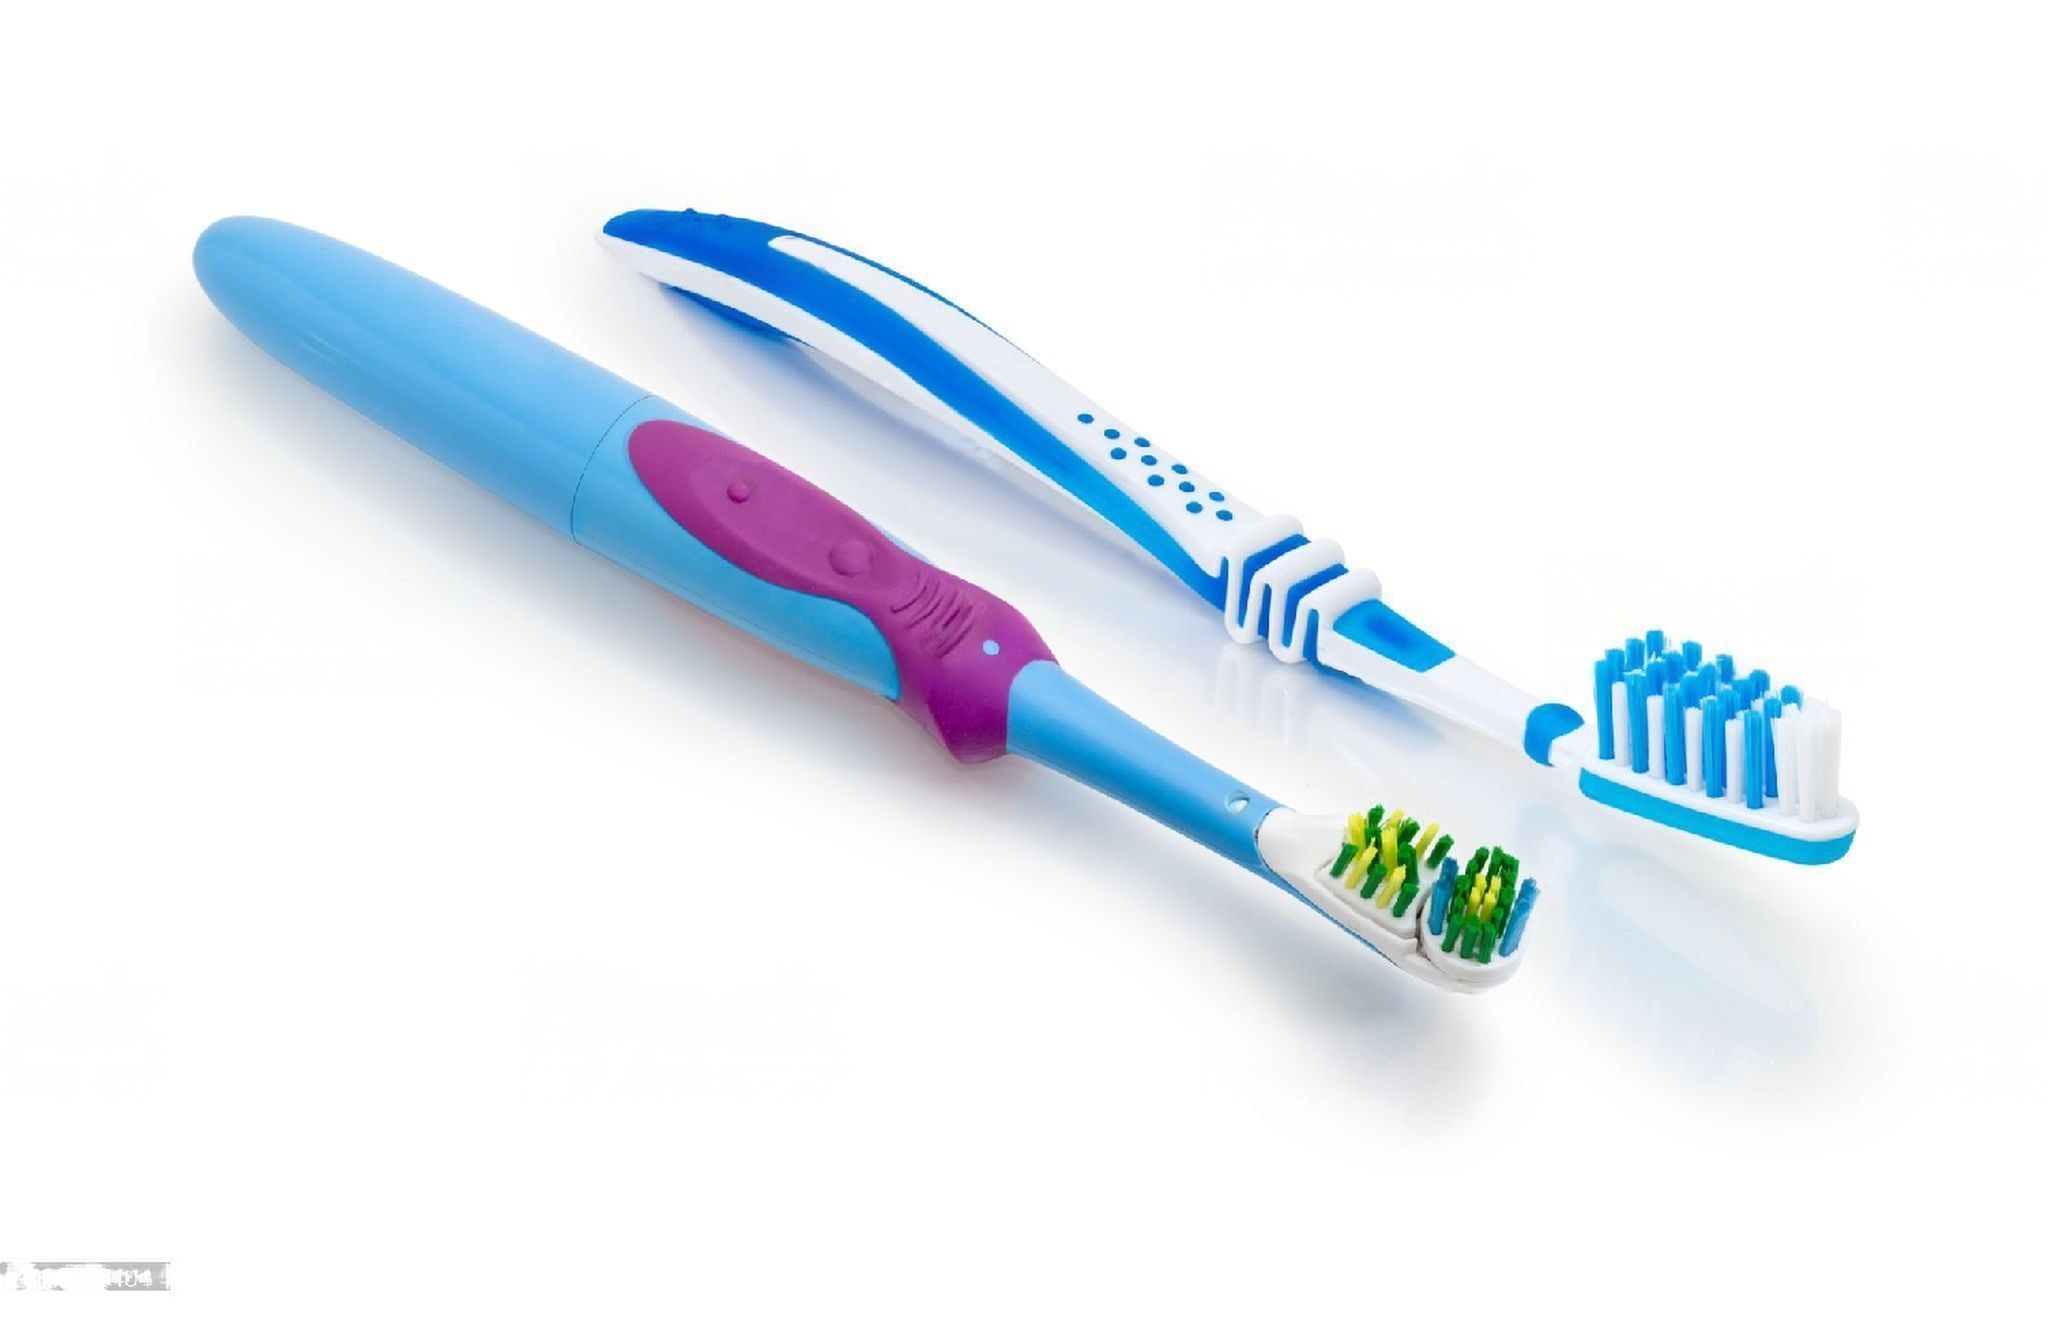 Electric vs. Traditional Toothbrush